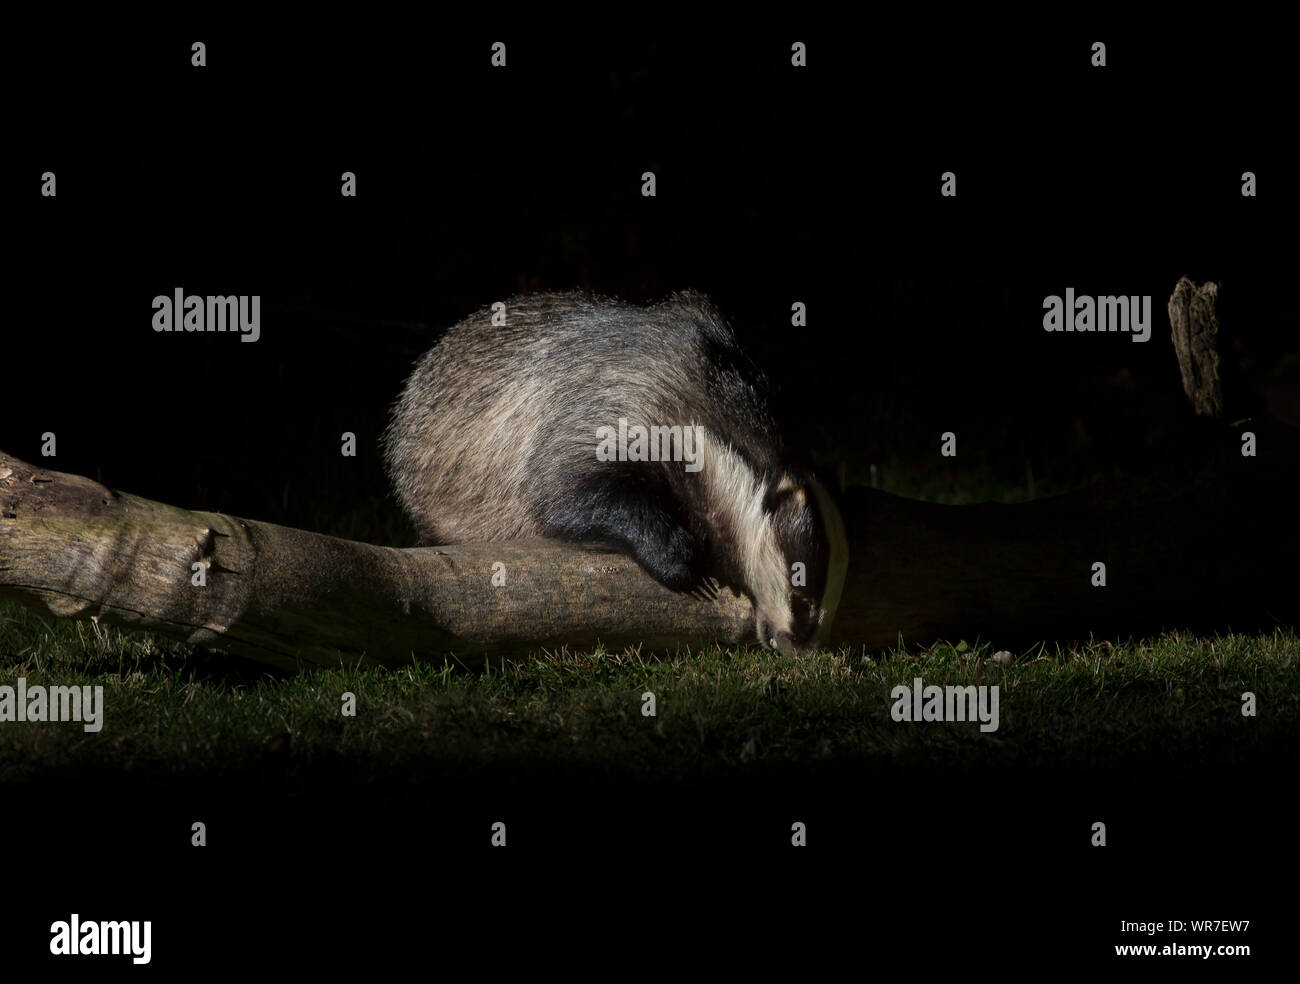 Close-up front view of wild, urban British badger (Meles meles UK) isolated outdoors in the dark, foraging for food on ground in a UK garden at night. Stock Photo